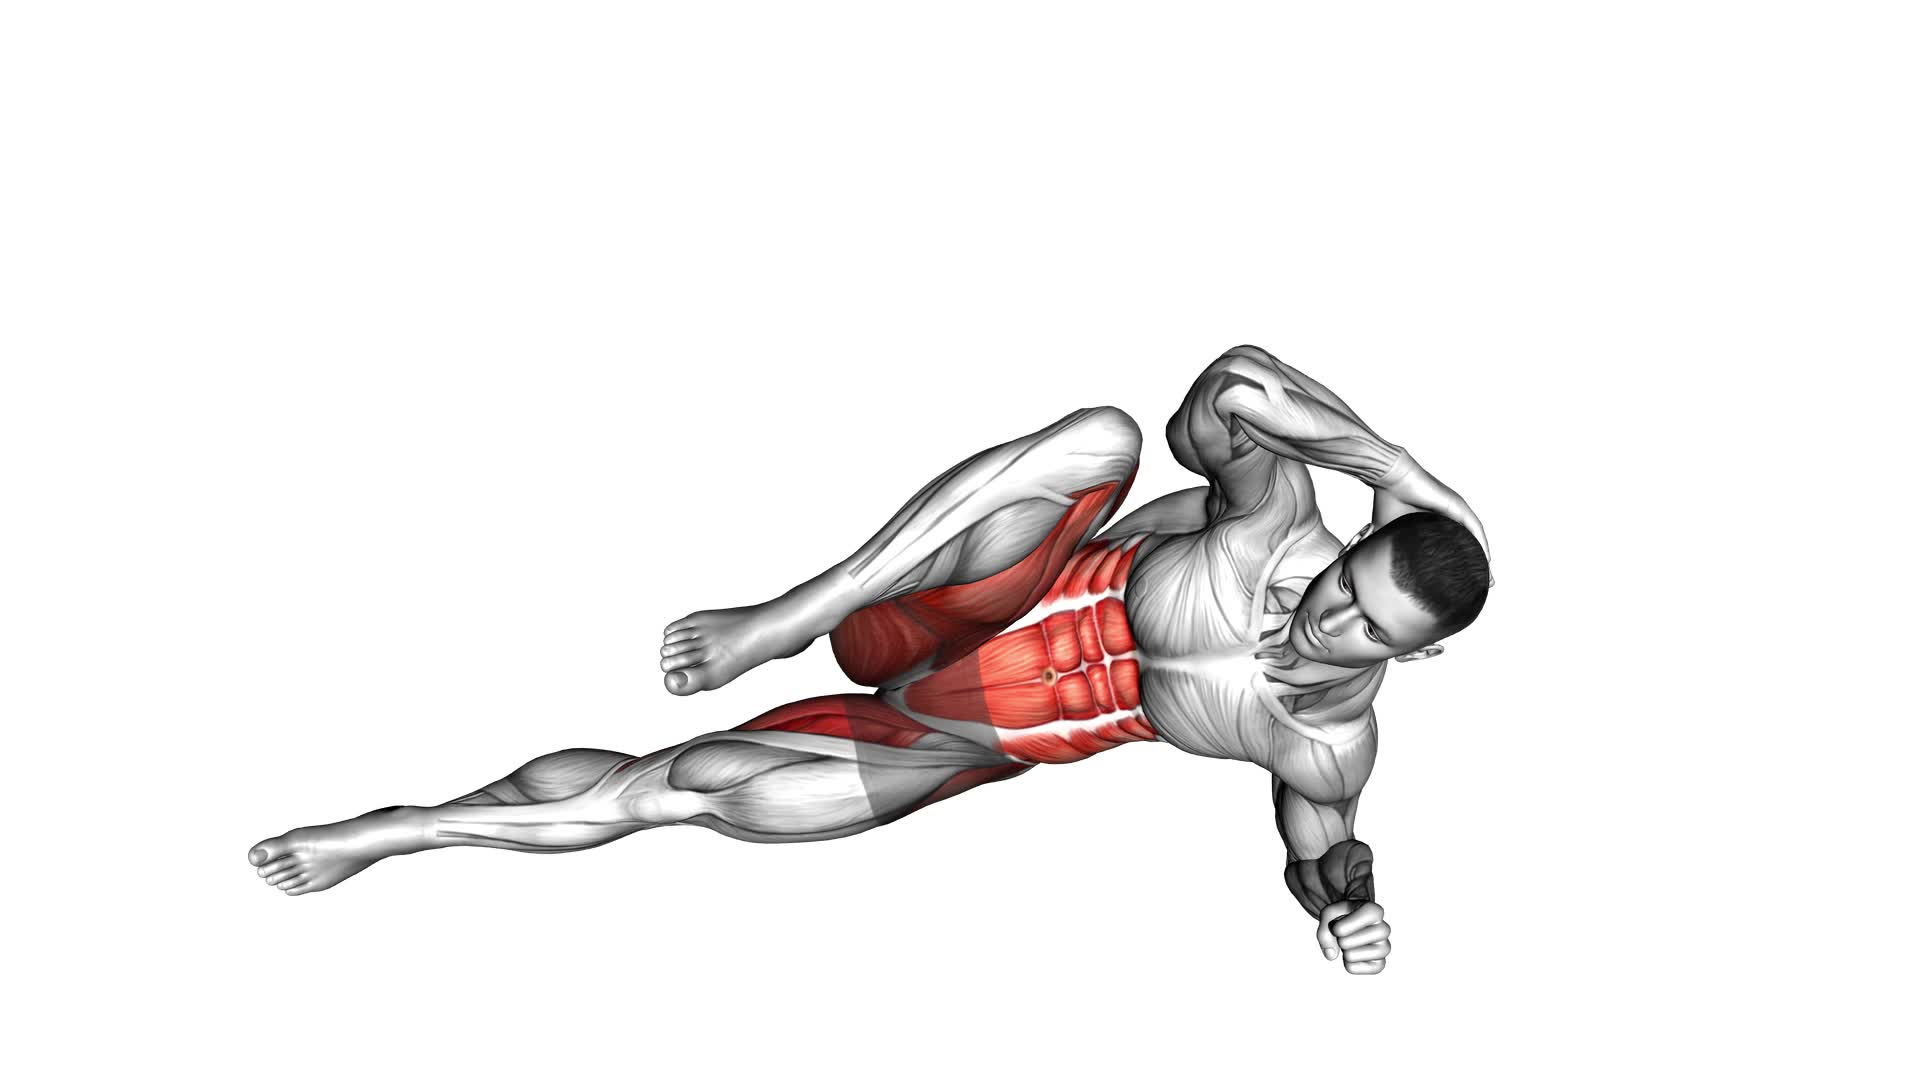 Elbow to Knee Side Plank Crunch (male) - Video Exercise Guide & Tips